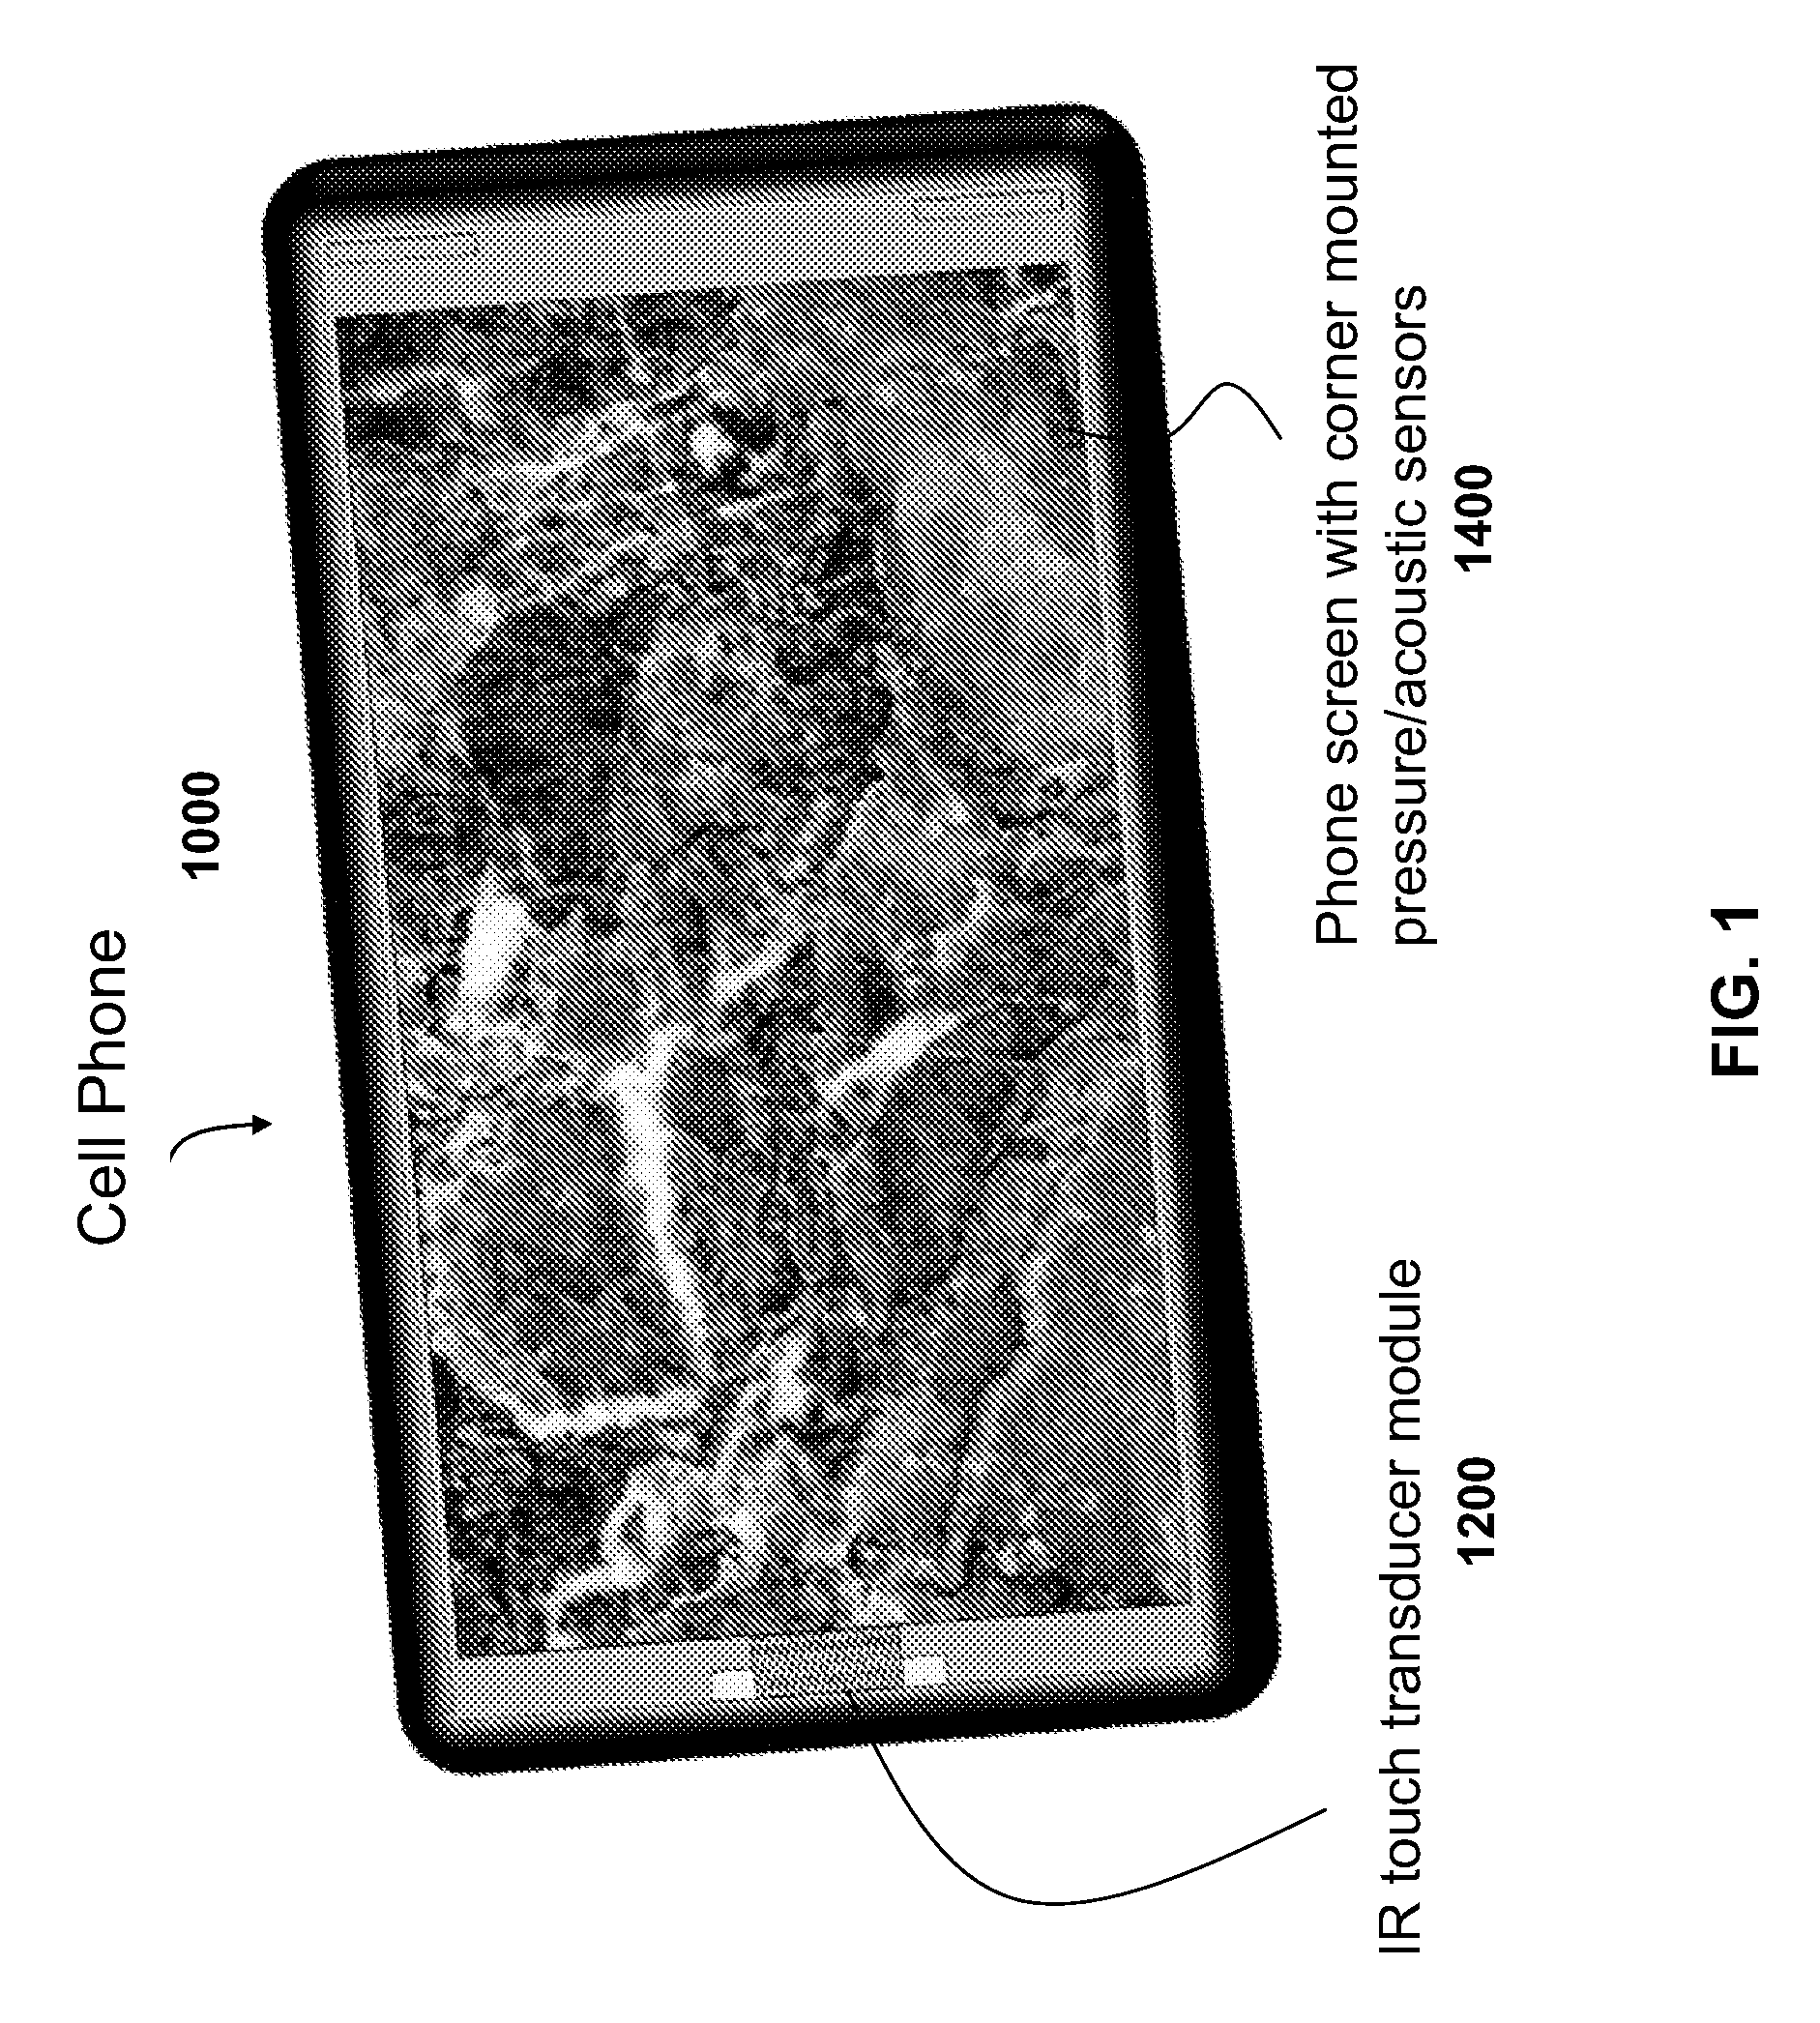 System and method for contactless touch screen